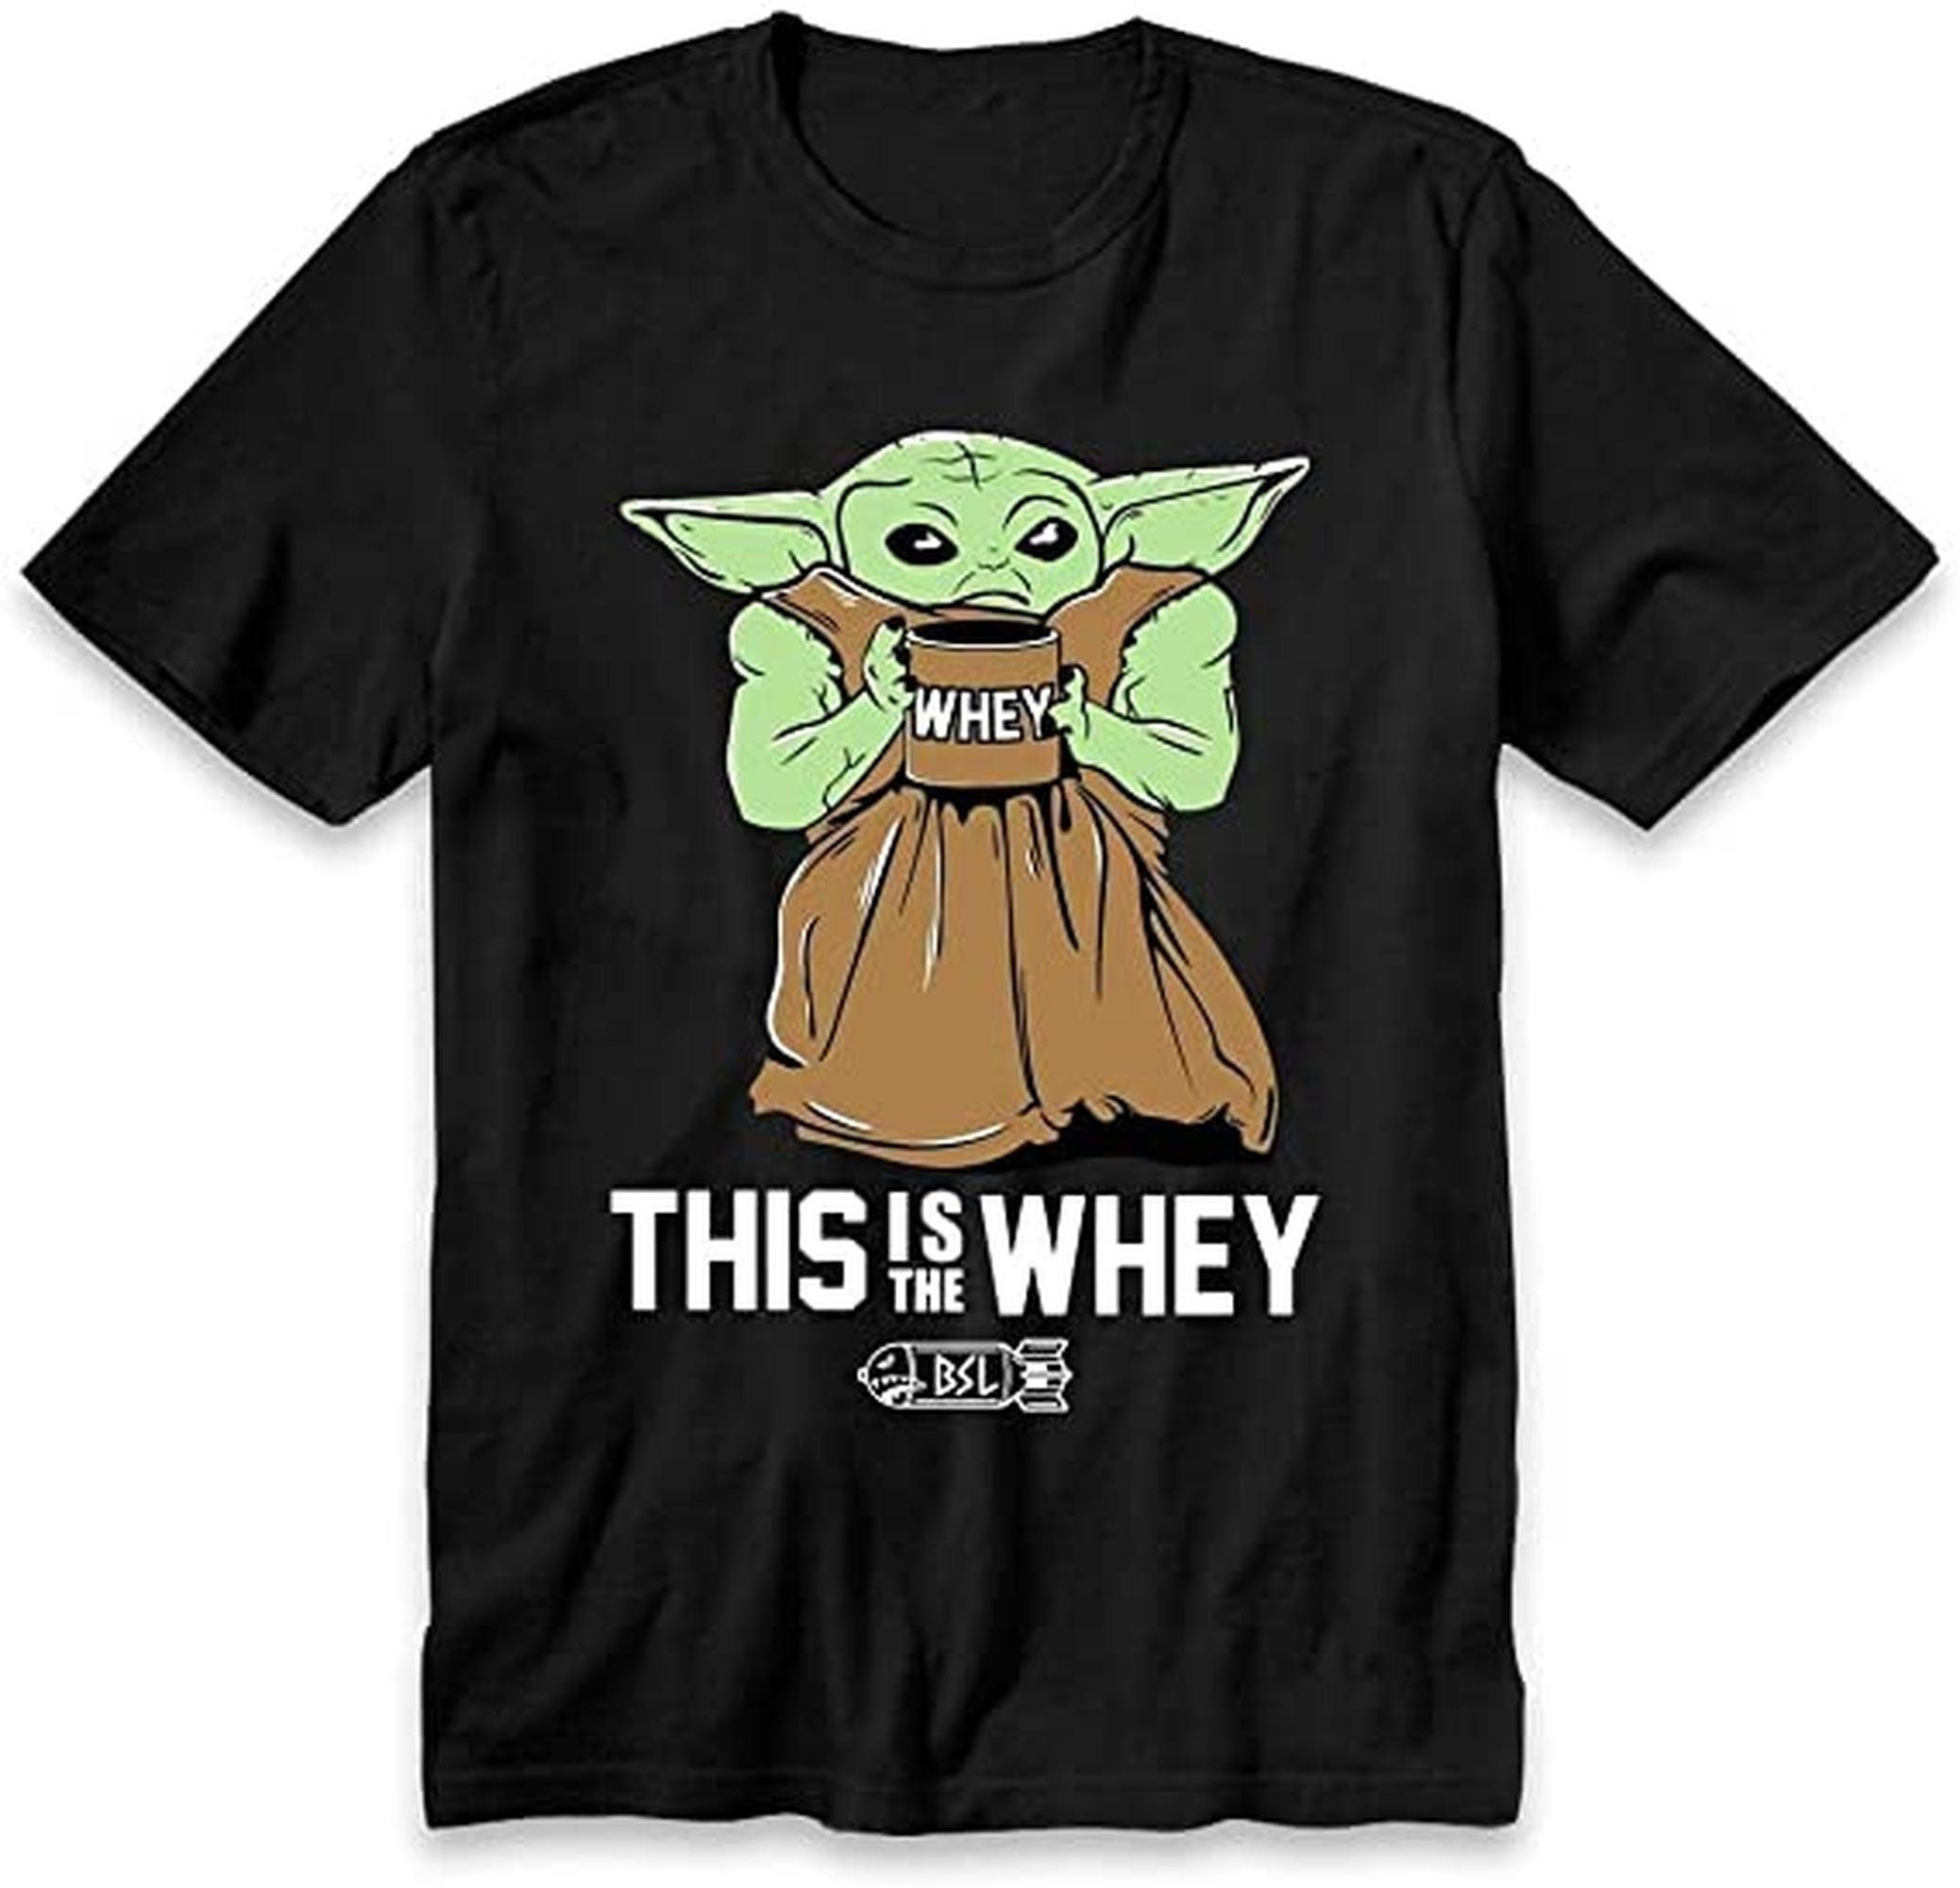 This is The Whey Baby Yoda, T-shirts Lovers